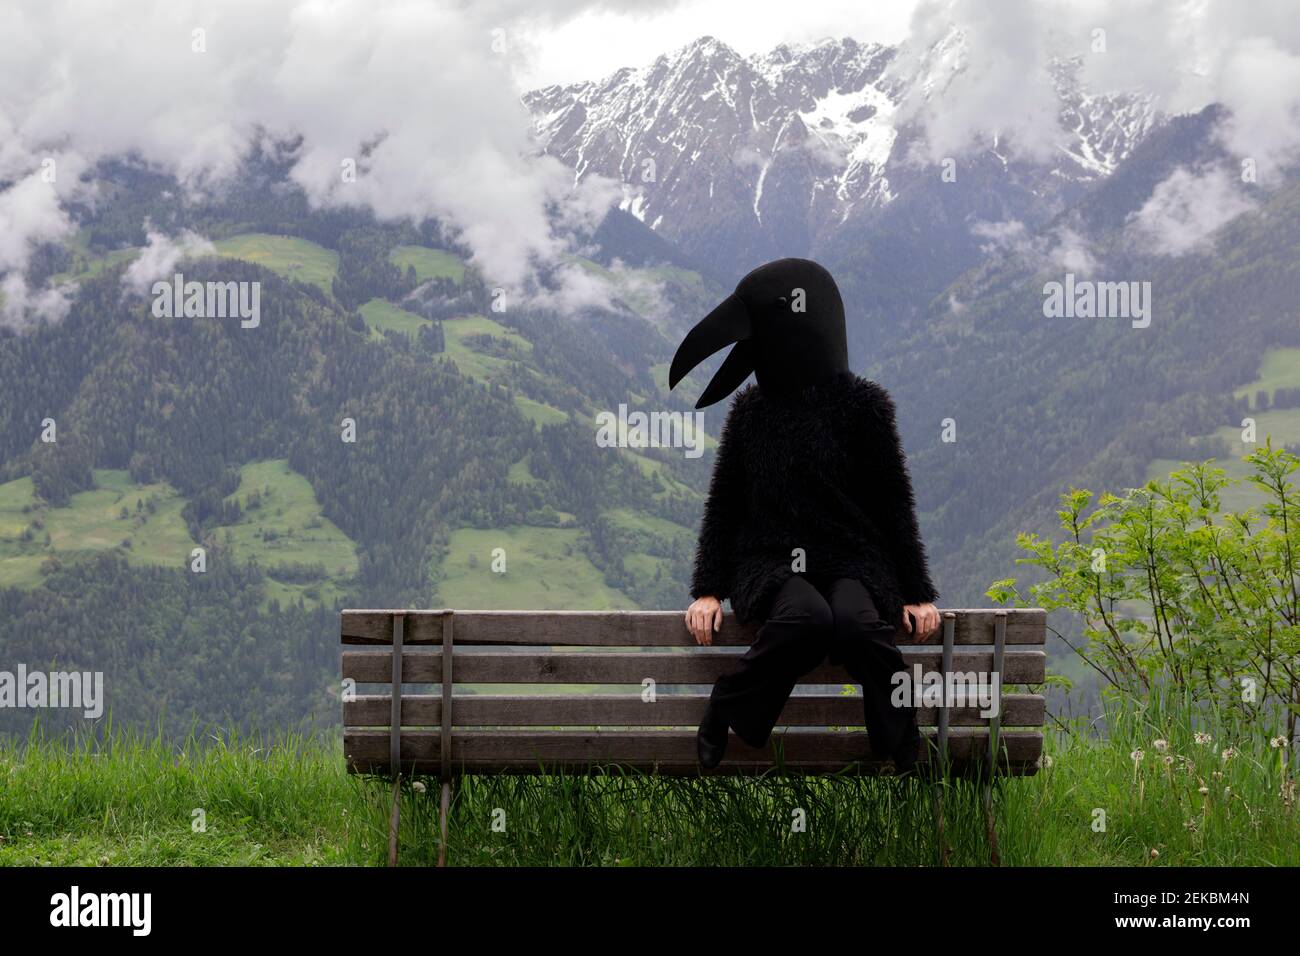 Female in crow costume sitting on bench against mountain range Stock Photo